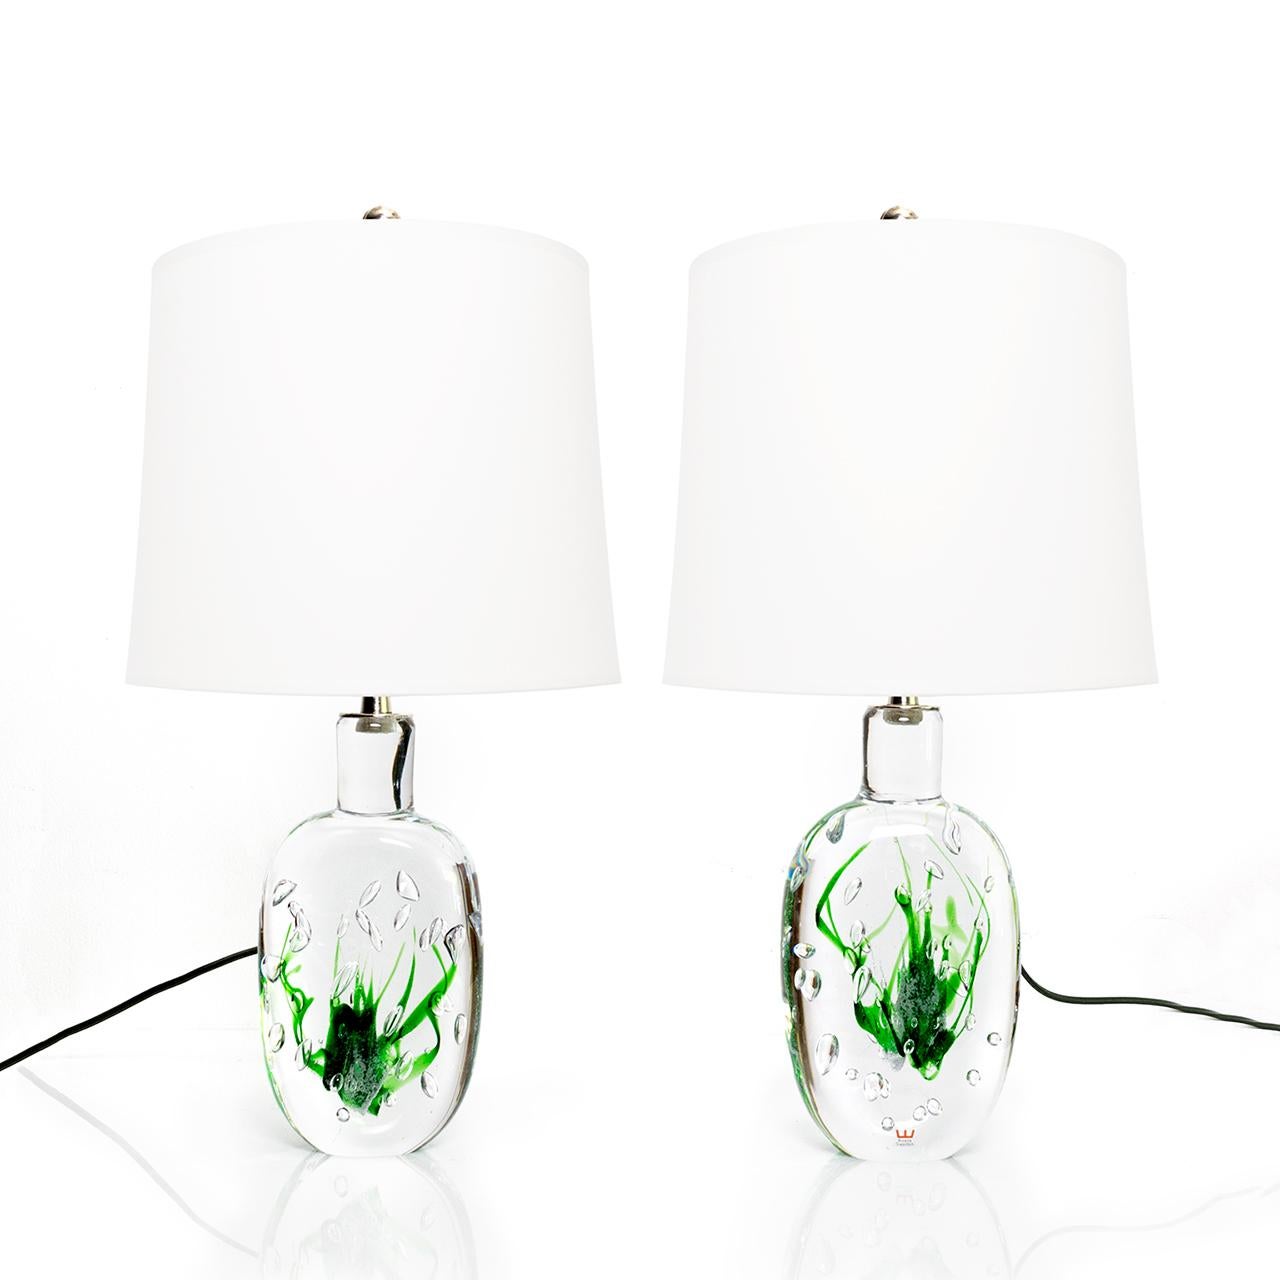 Hand-forged solid crystal table lamps with decorative bubbles and abstract green designs. Newly rewired with nickel plated hardware including a three-way Edison base socket, and silk cord. 

Measures: Total height 21”, body heigh 10 “, body width